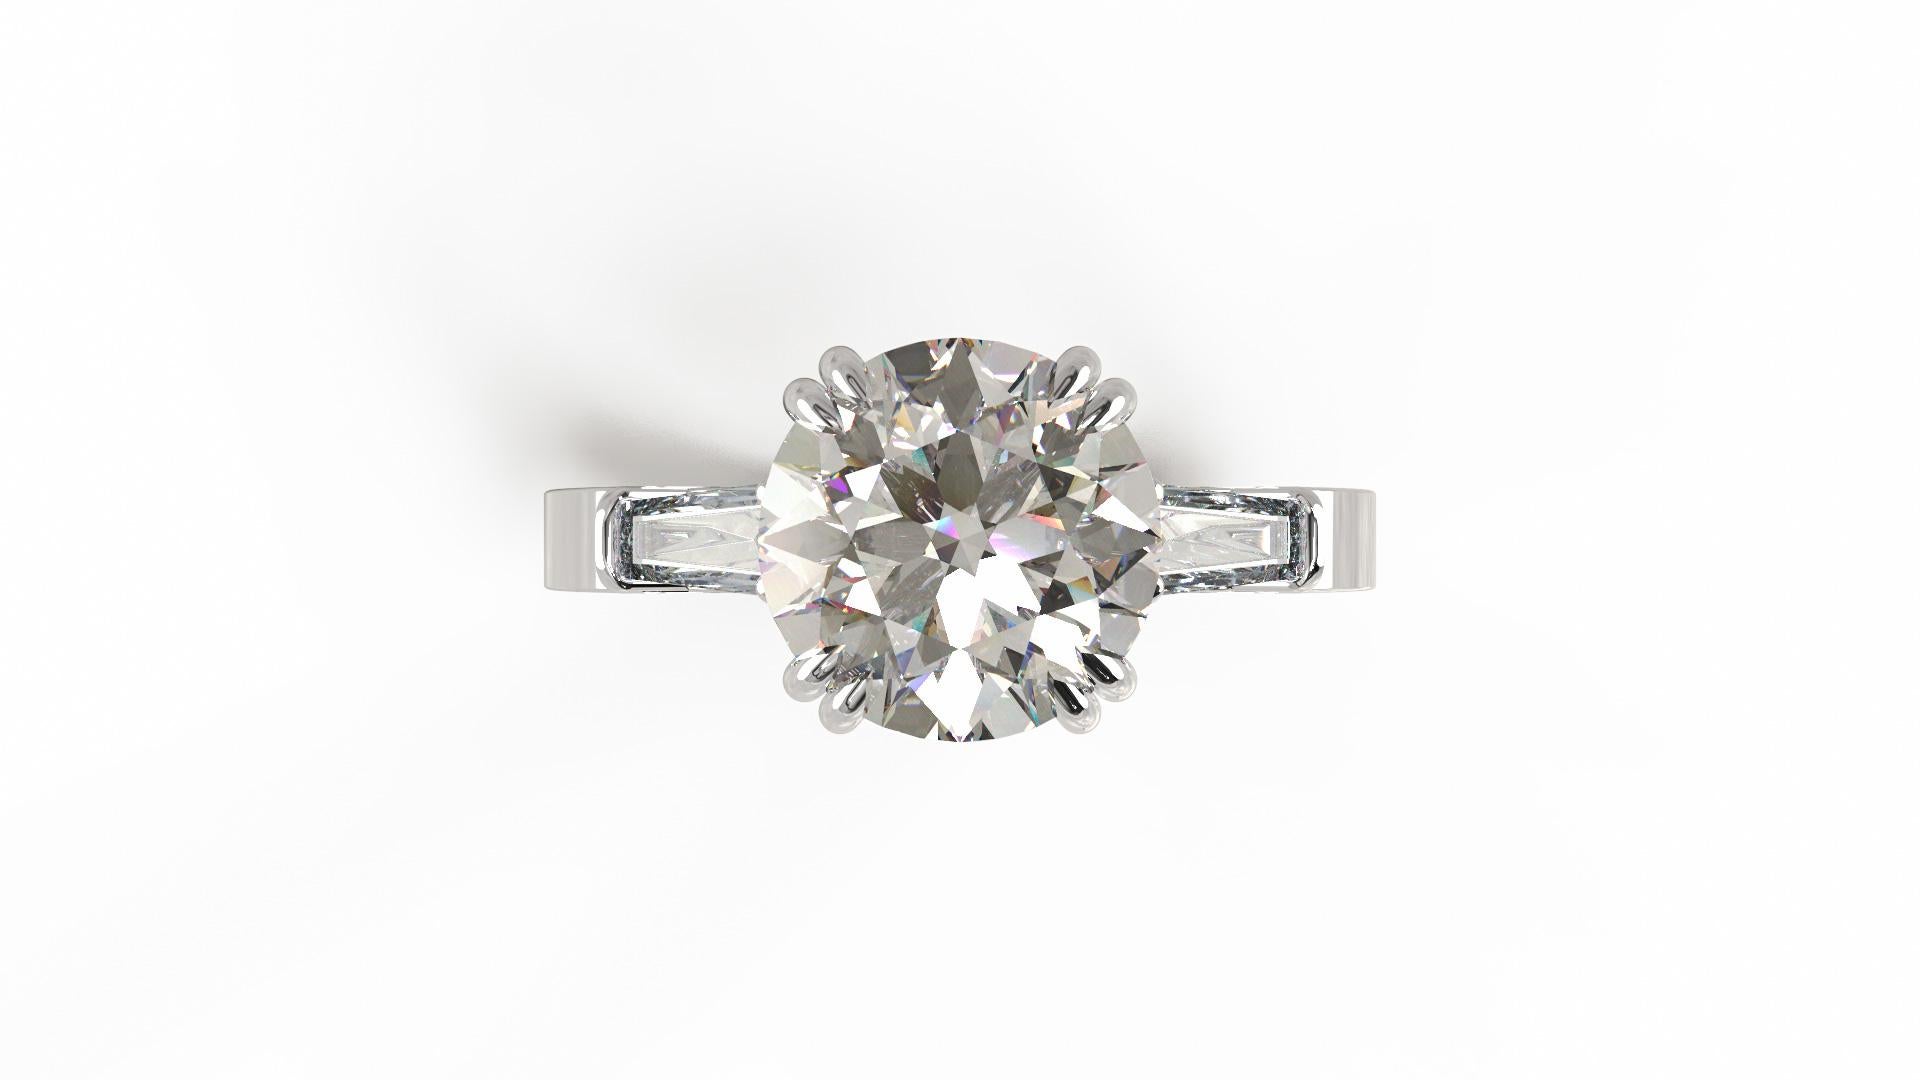 Featured here is an excellent cut GIA certified diamond with a perfect color and clarity combination for an engagement ring! This 2ct round brilliant cut diamond has been cut to excellent proportions and it has fantastic light performance! Its